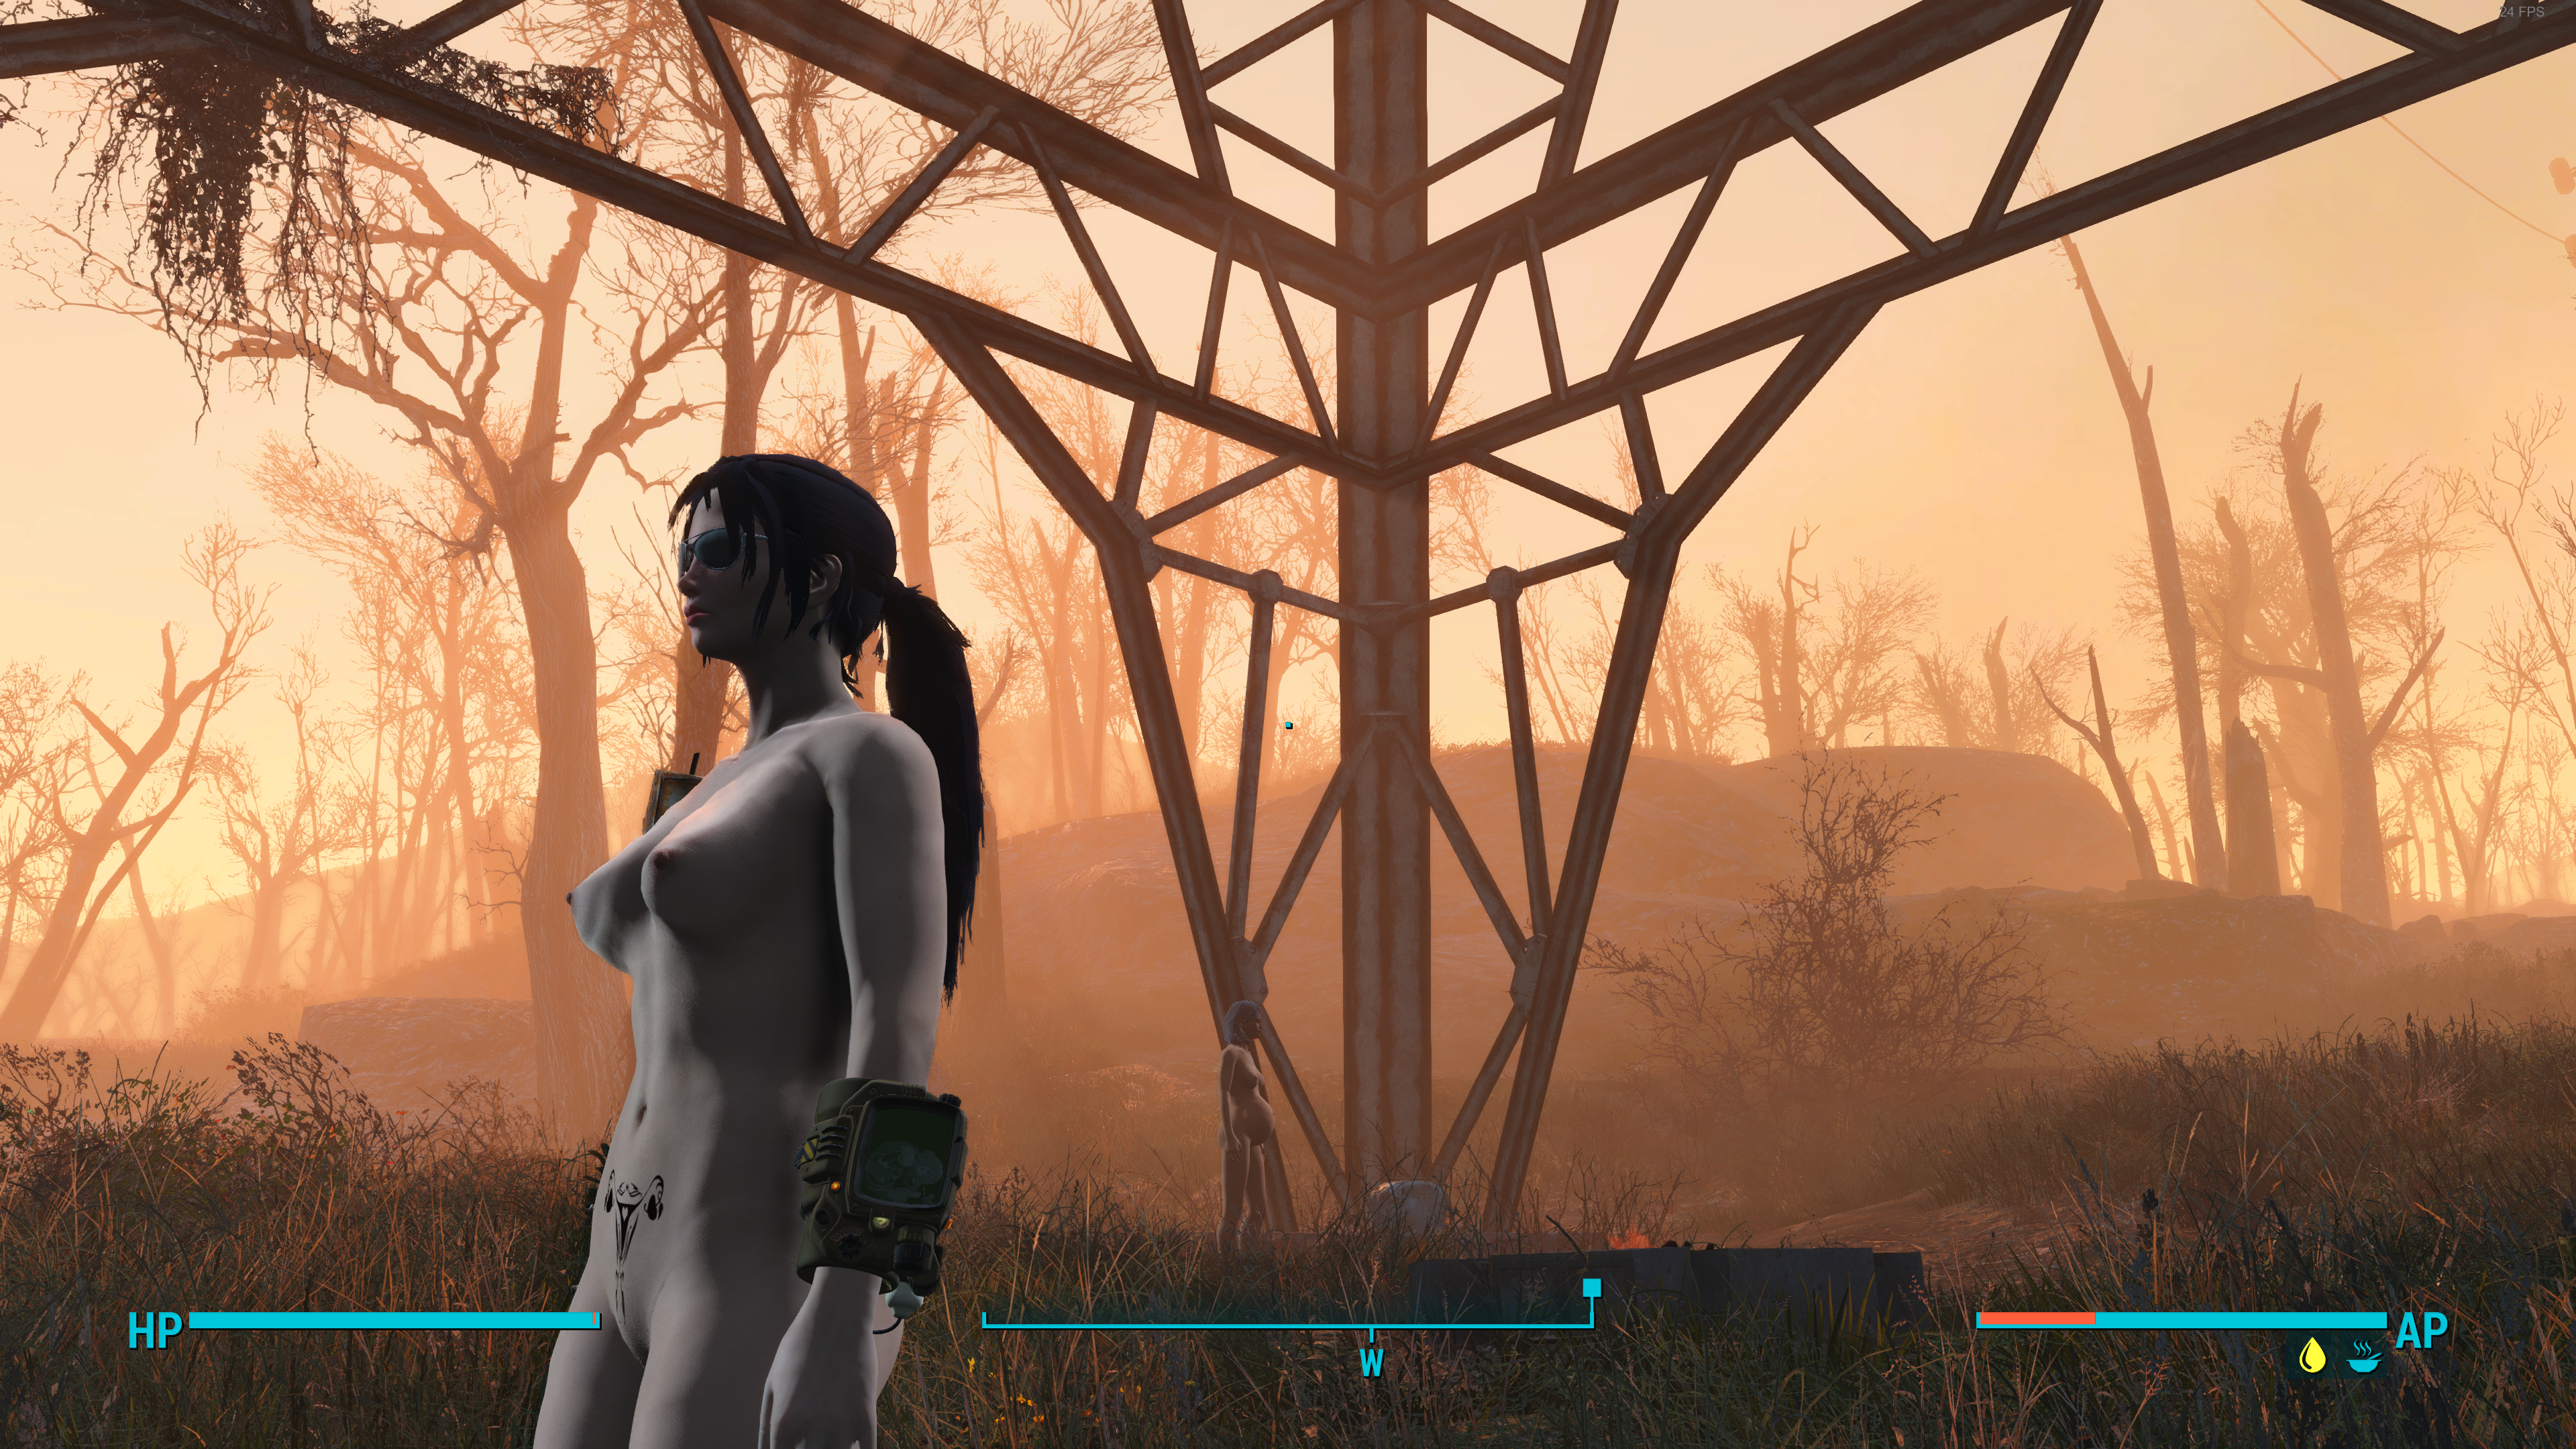 Fusion Body help - saggy breasts - Fallout 4 Technical Support - LoversLab